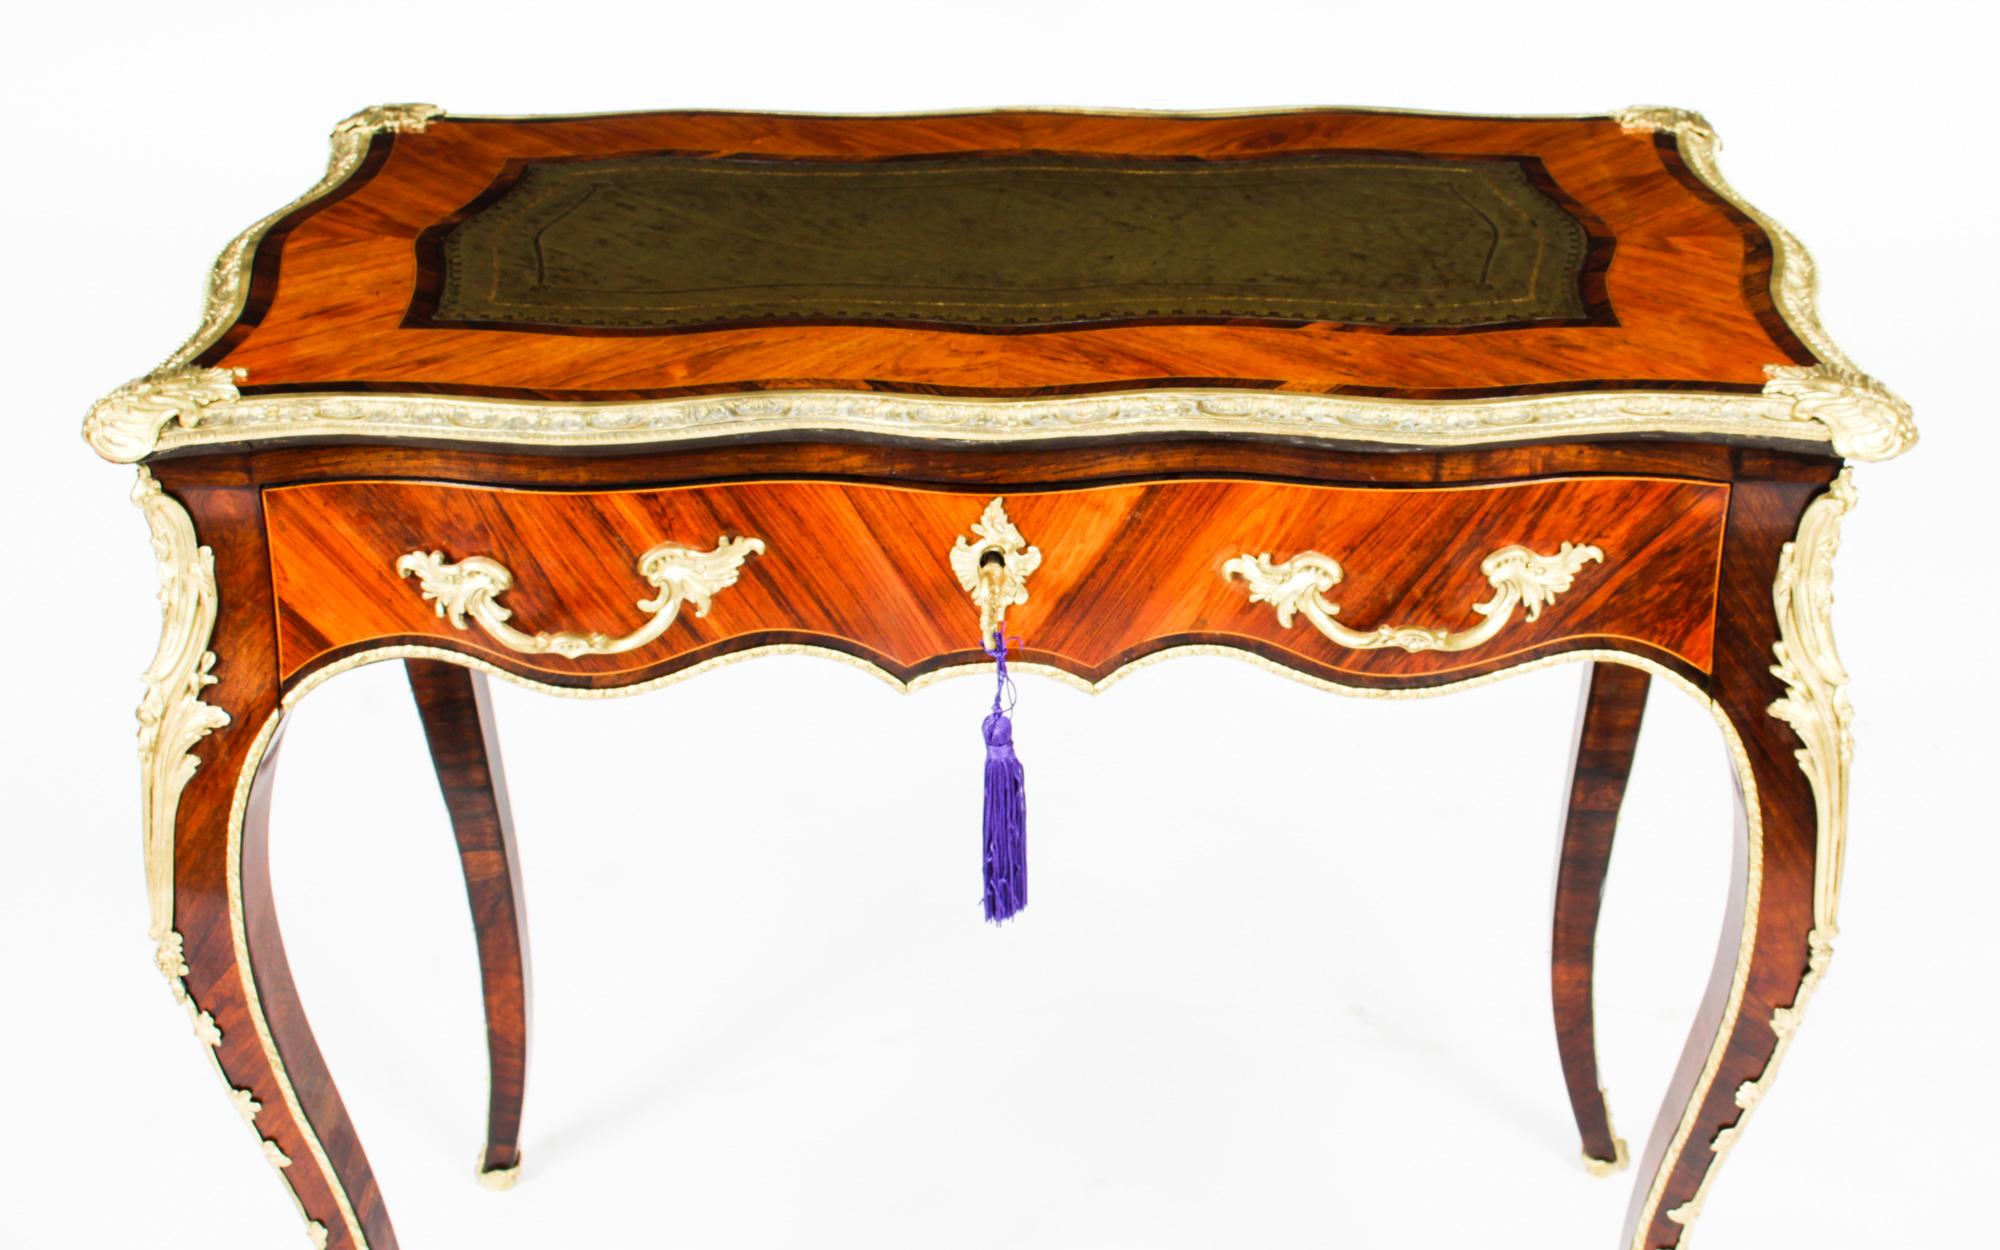 This is an fine and beautiful petite French Louis XV Revival goncalo alves and ormolu mounted bureau plat, circa 1850 in date.
This fantastic bureau plat features an ornate serpentine crossbanded top inset with a gold tooled green leather writing